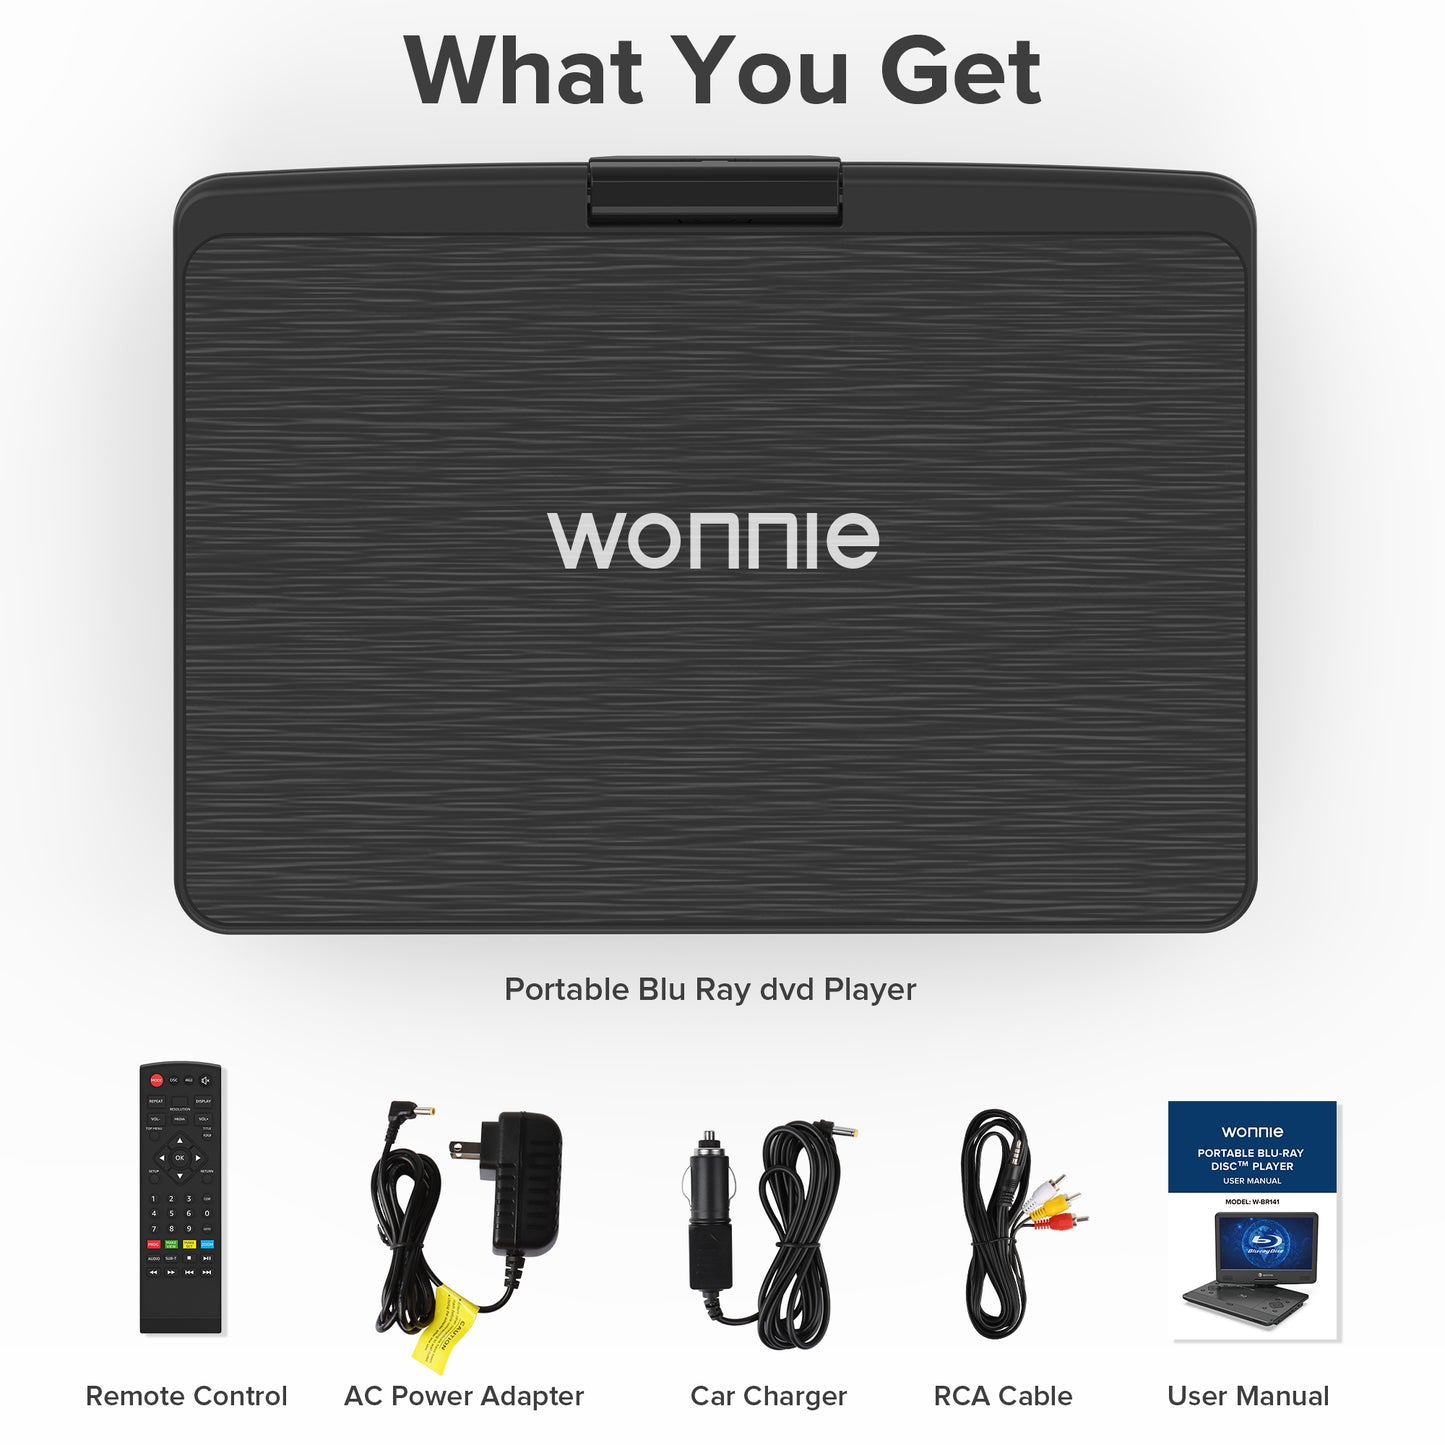 WONNIE Portable Blu Ray DVD Player, 16.9 inch DVD Player with 14.1" 1080p HD Screen, Blu Ray Players built in 5000mAh Battery, Supports HDMI Output, Dolby Audio, Last Memory, USB/SD Card, AV in